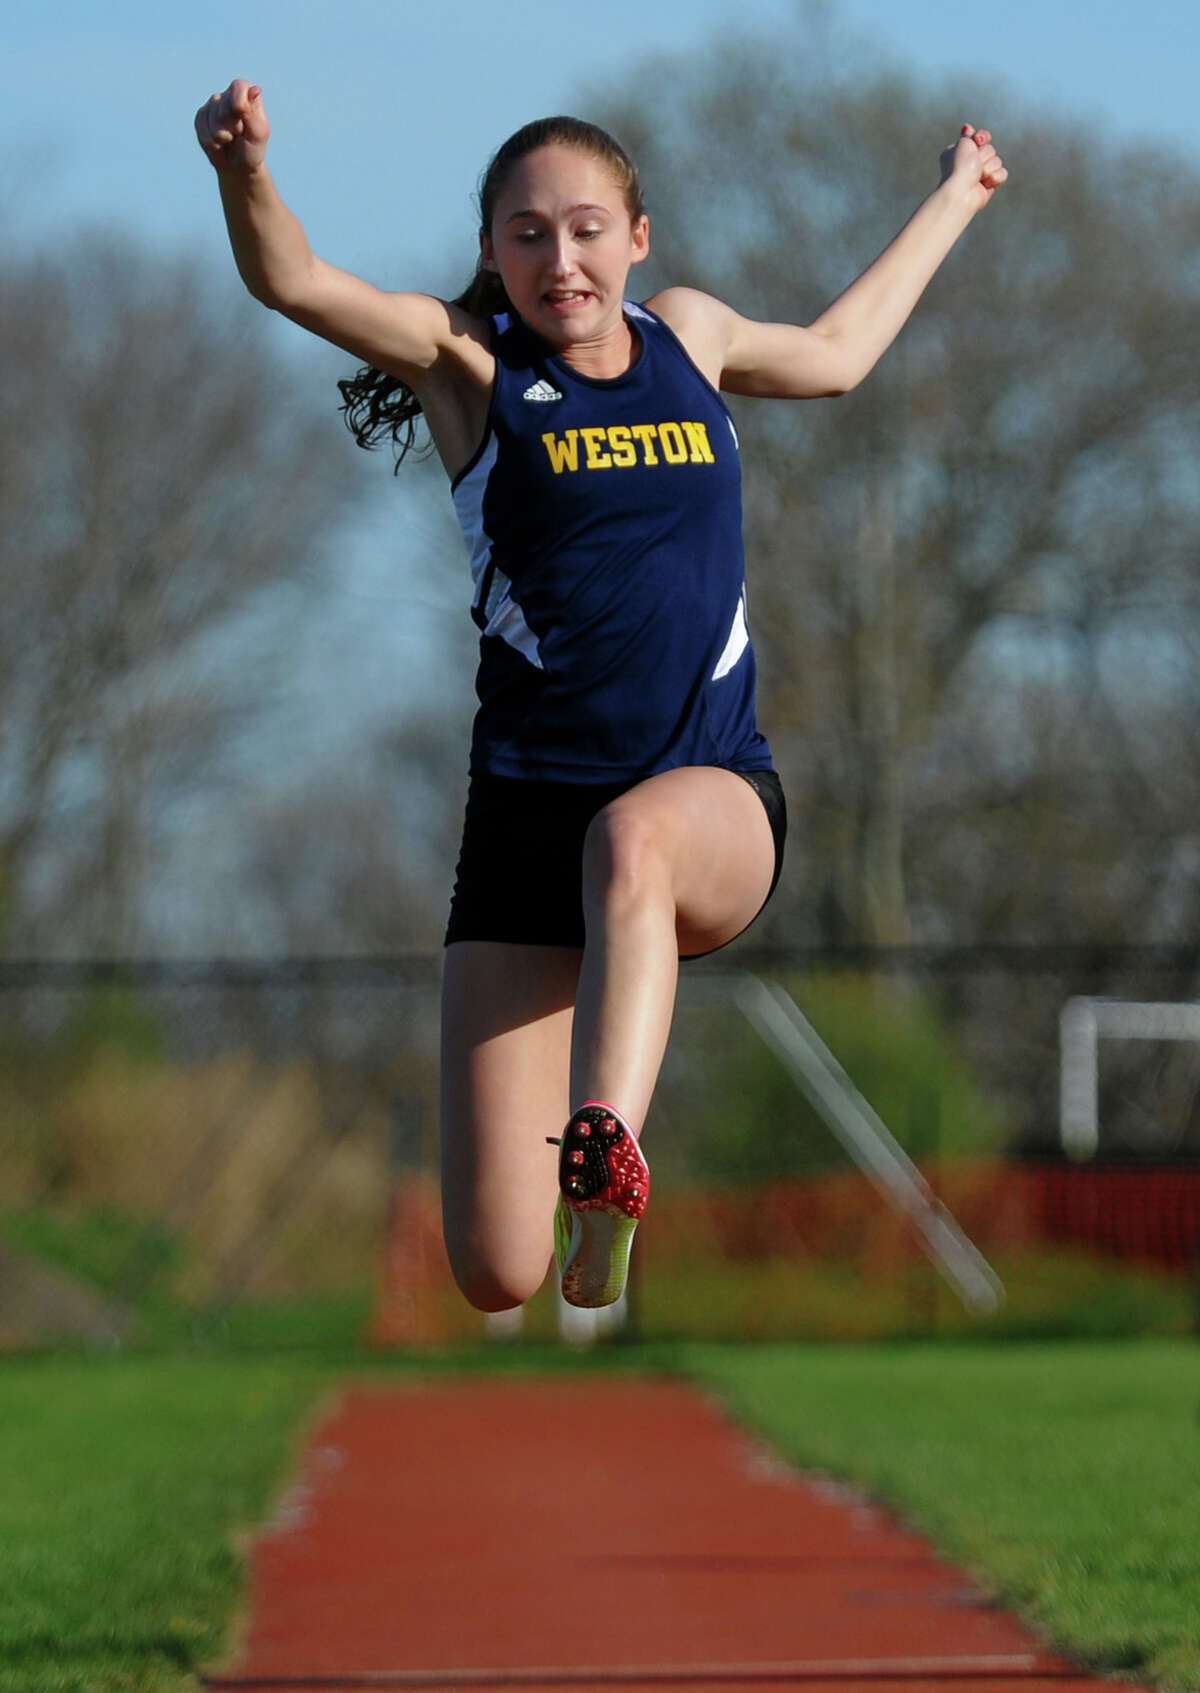 Weston's Chloe Shapiro competes in the triple jump event, during track action at Barlow High in Redding, Conn. on Tuesday April 30, 2013. Also competing were Immaculate and Masuk.